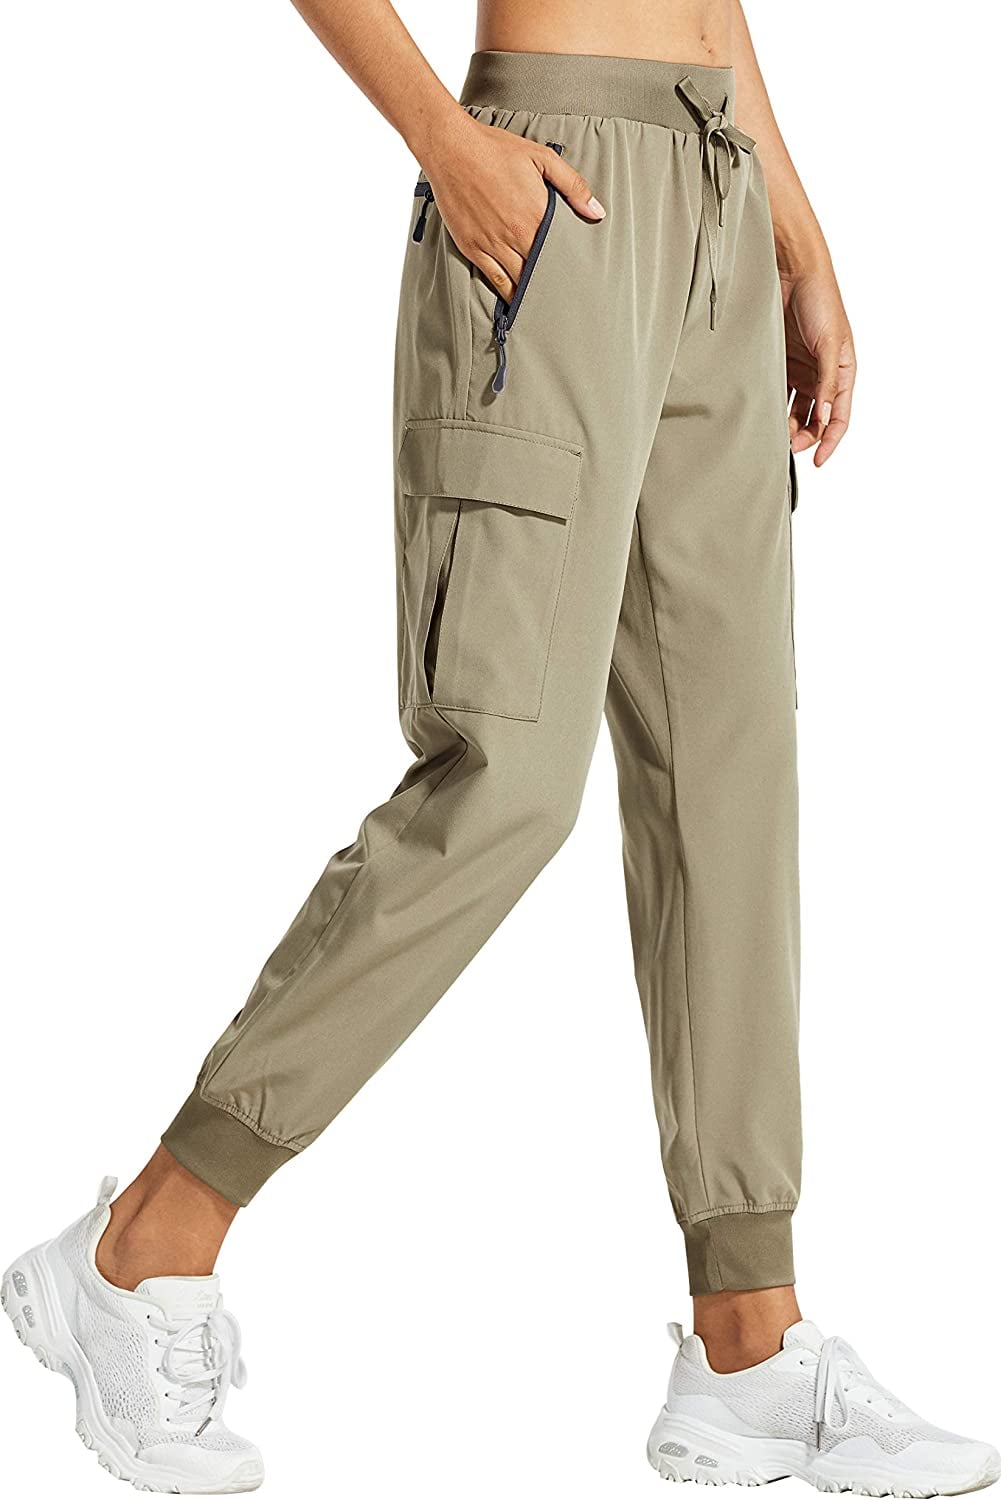 Super Comfortable Pants for Spring to Summer